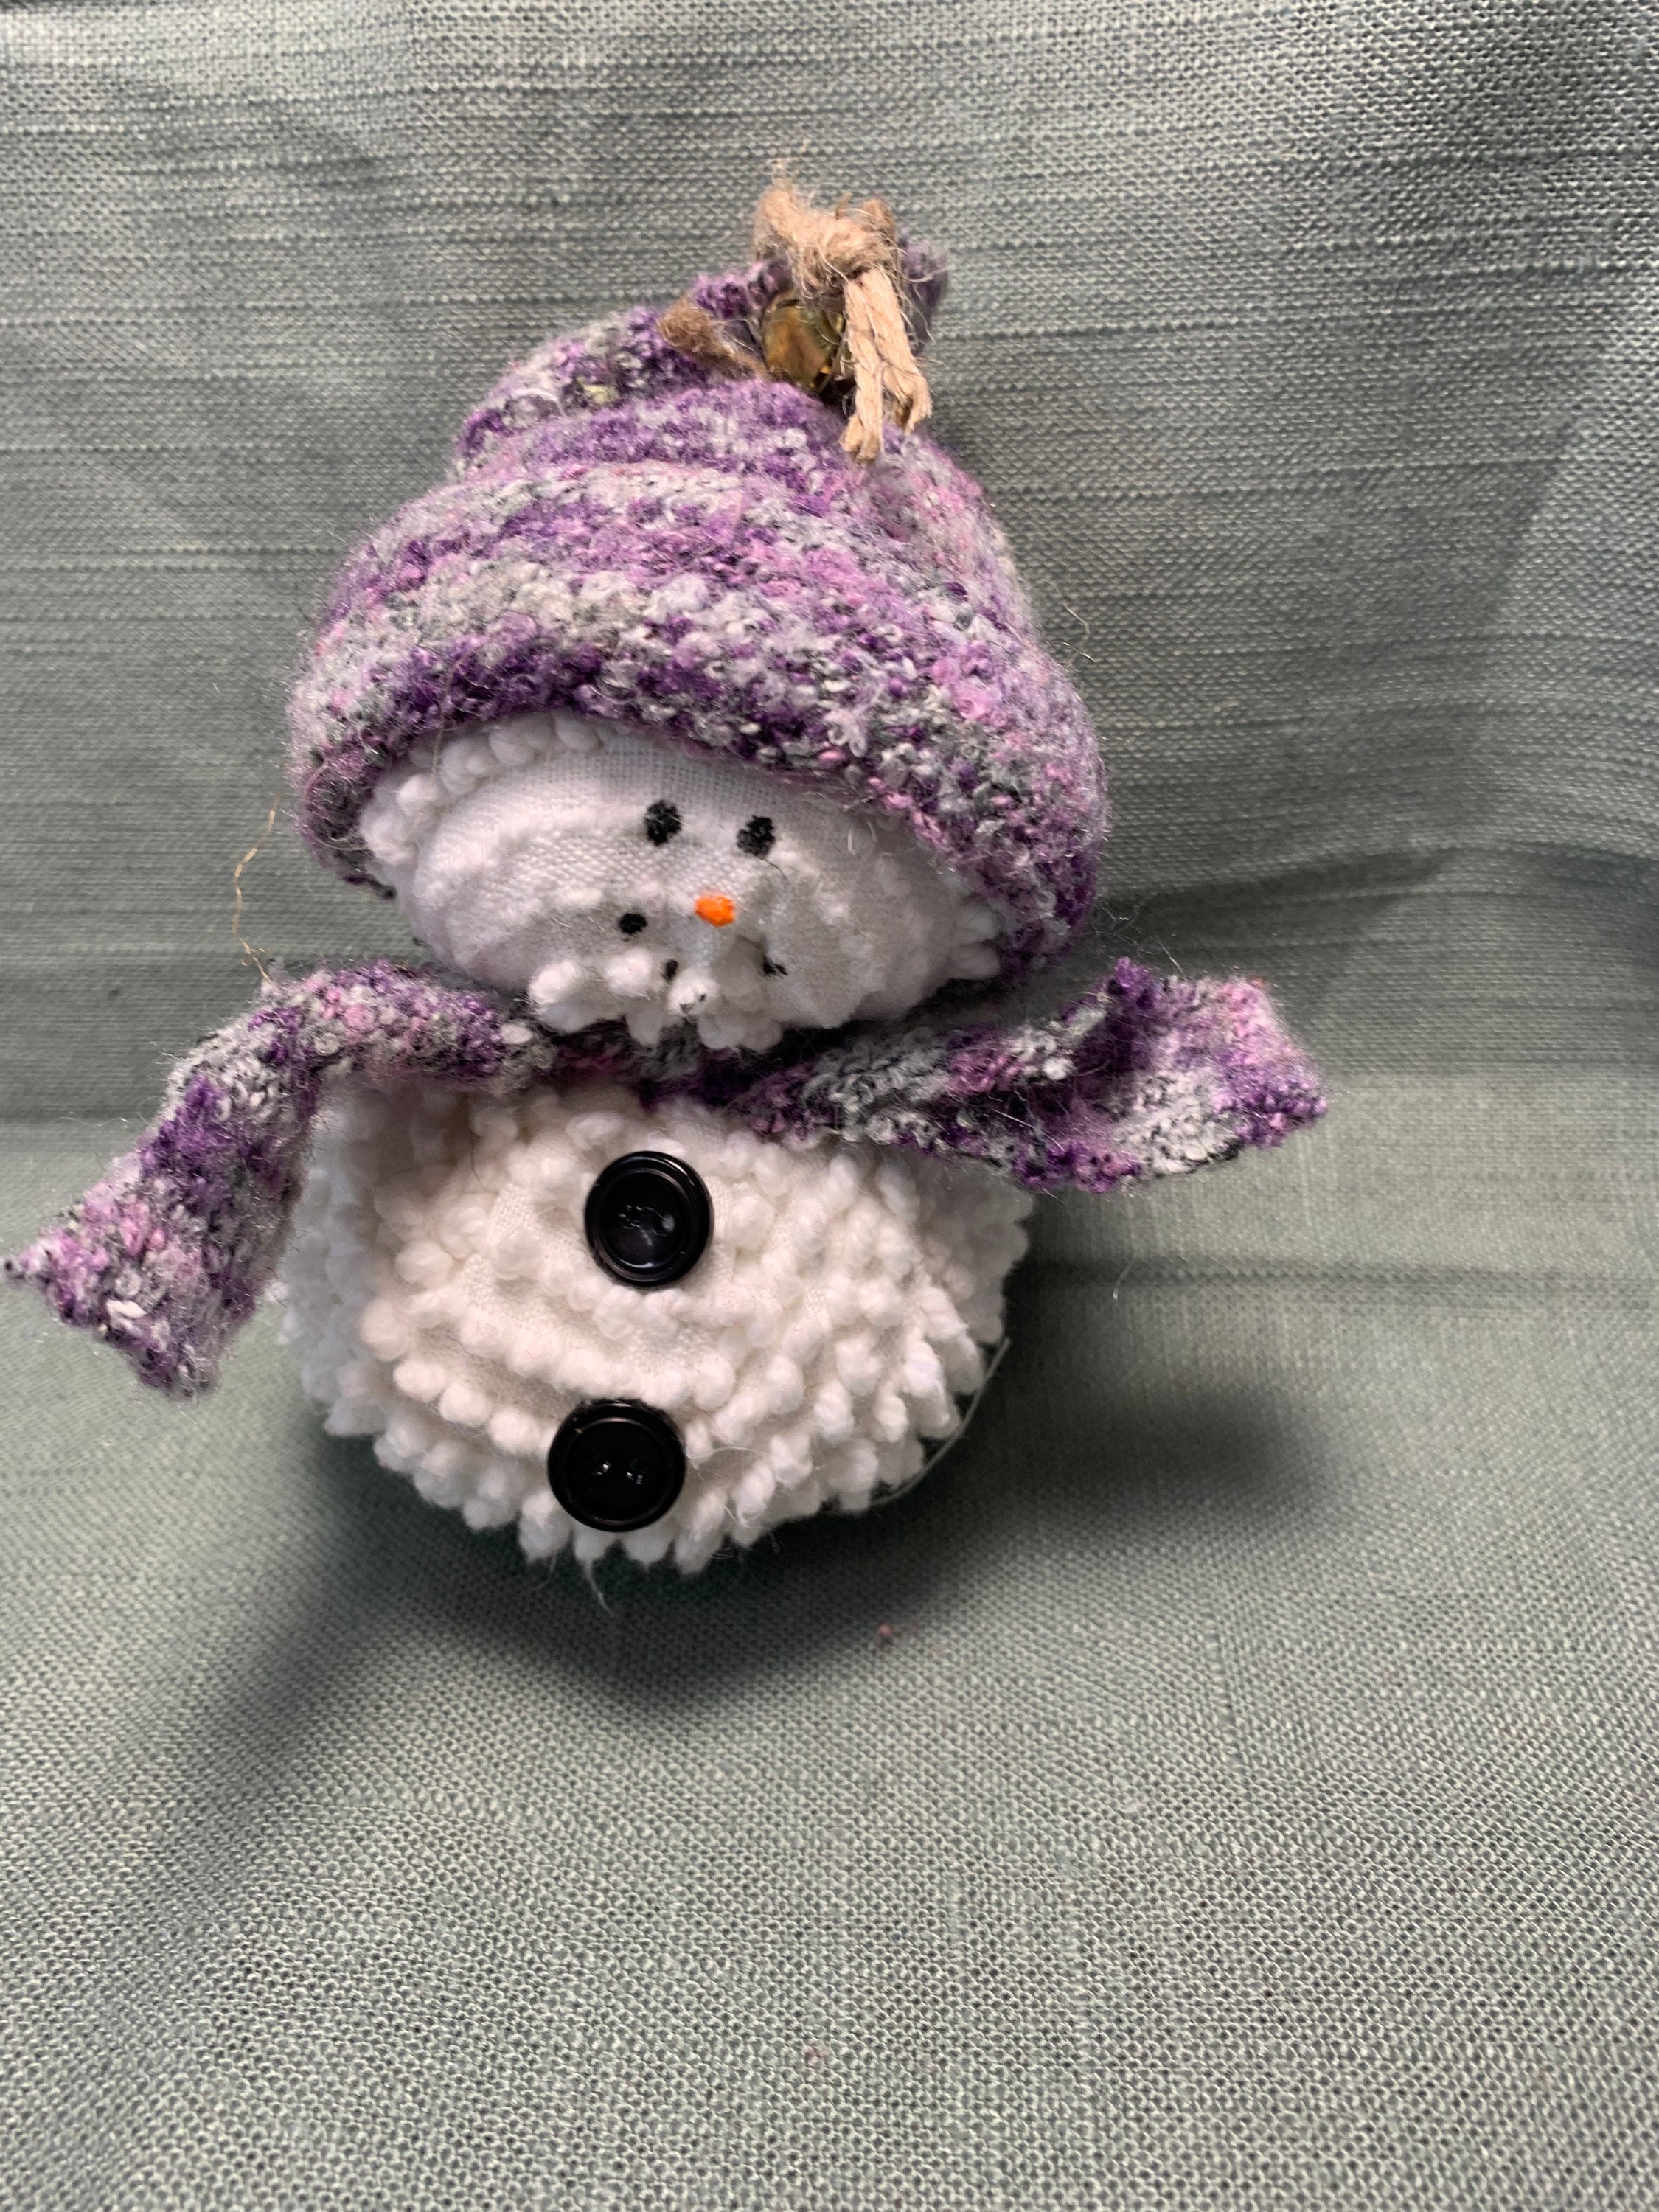 PINK Adorable Chenille Snowman with Wool hat and Scarf handmade using upcycled textiles